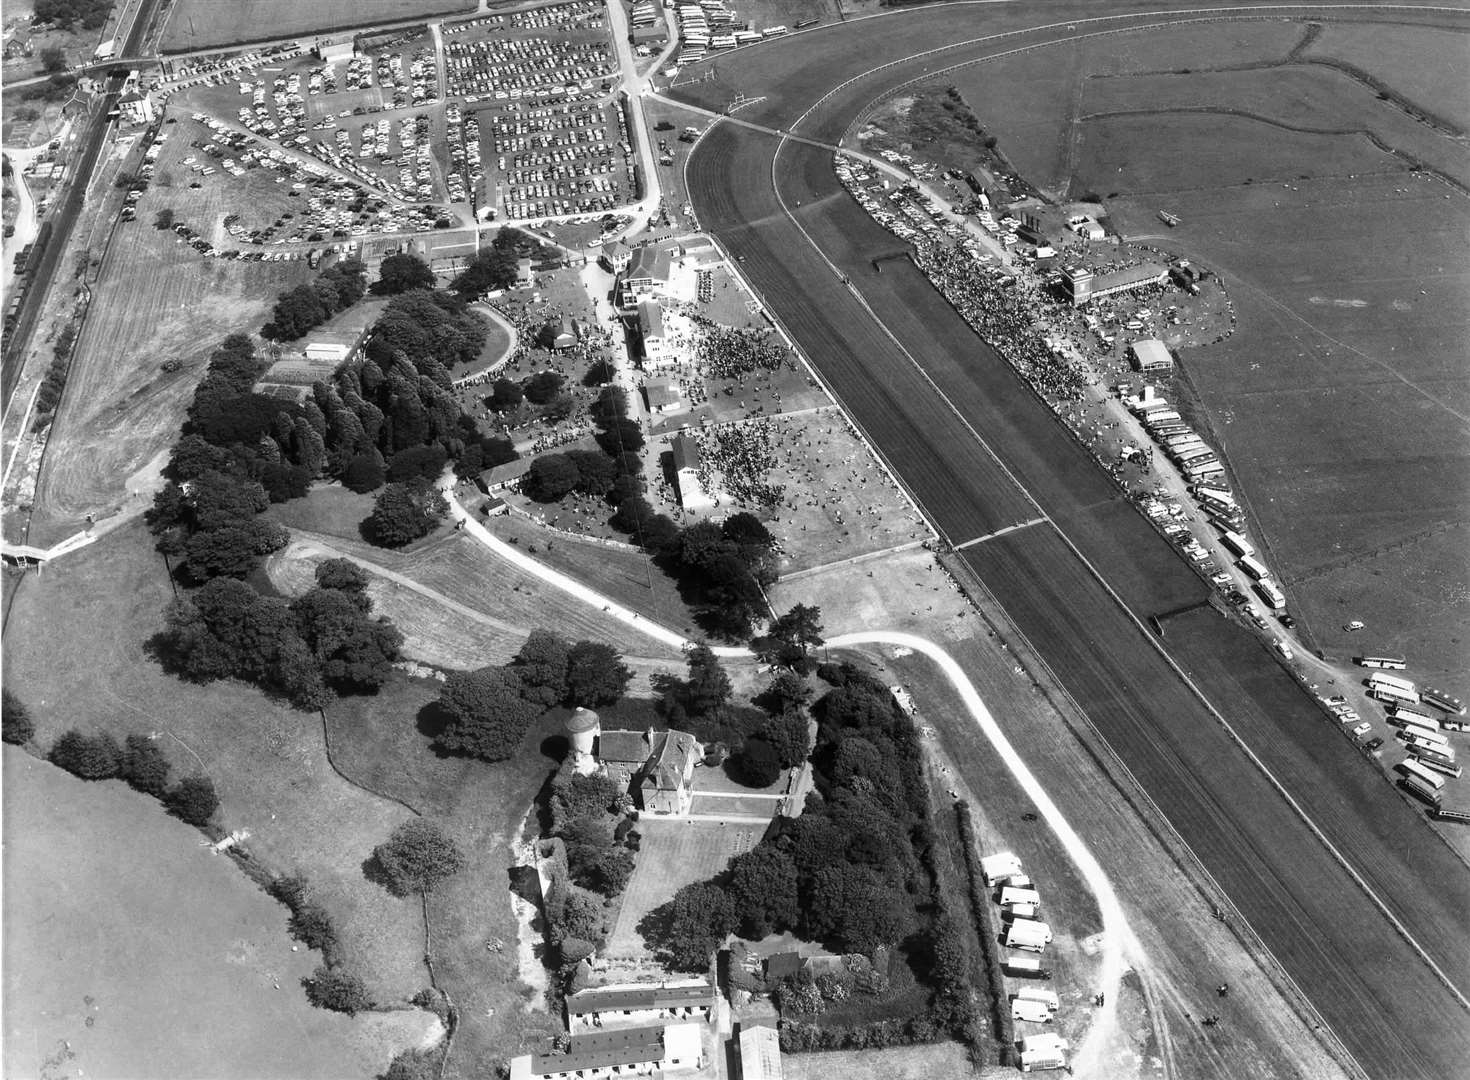 Folkestone Racecourse back in 1968. It hosted its last meeting in 2012, and the 203-acre site off the A20 is now at the centre of the huge Otterpool Park 'garden town' plan